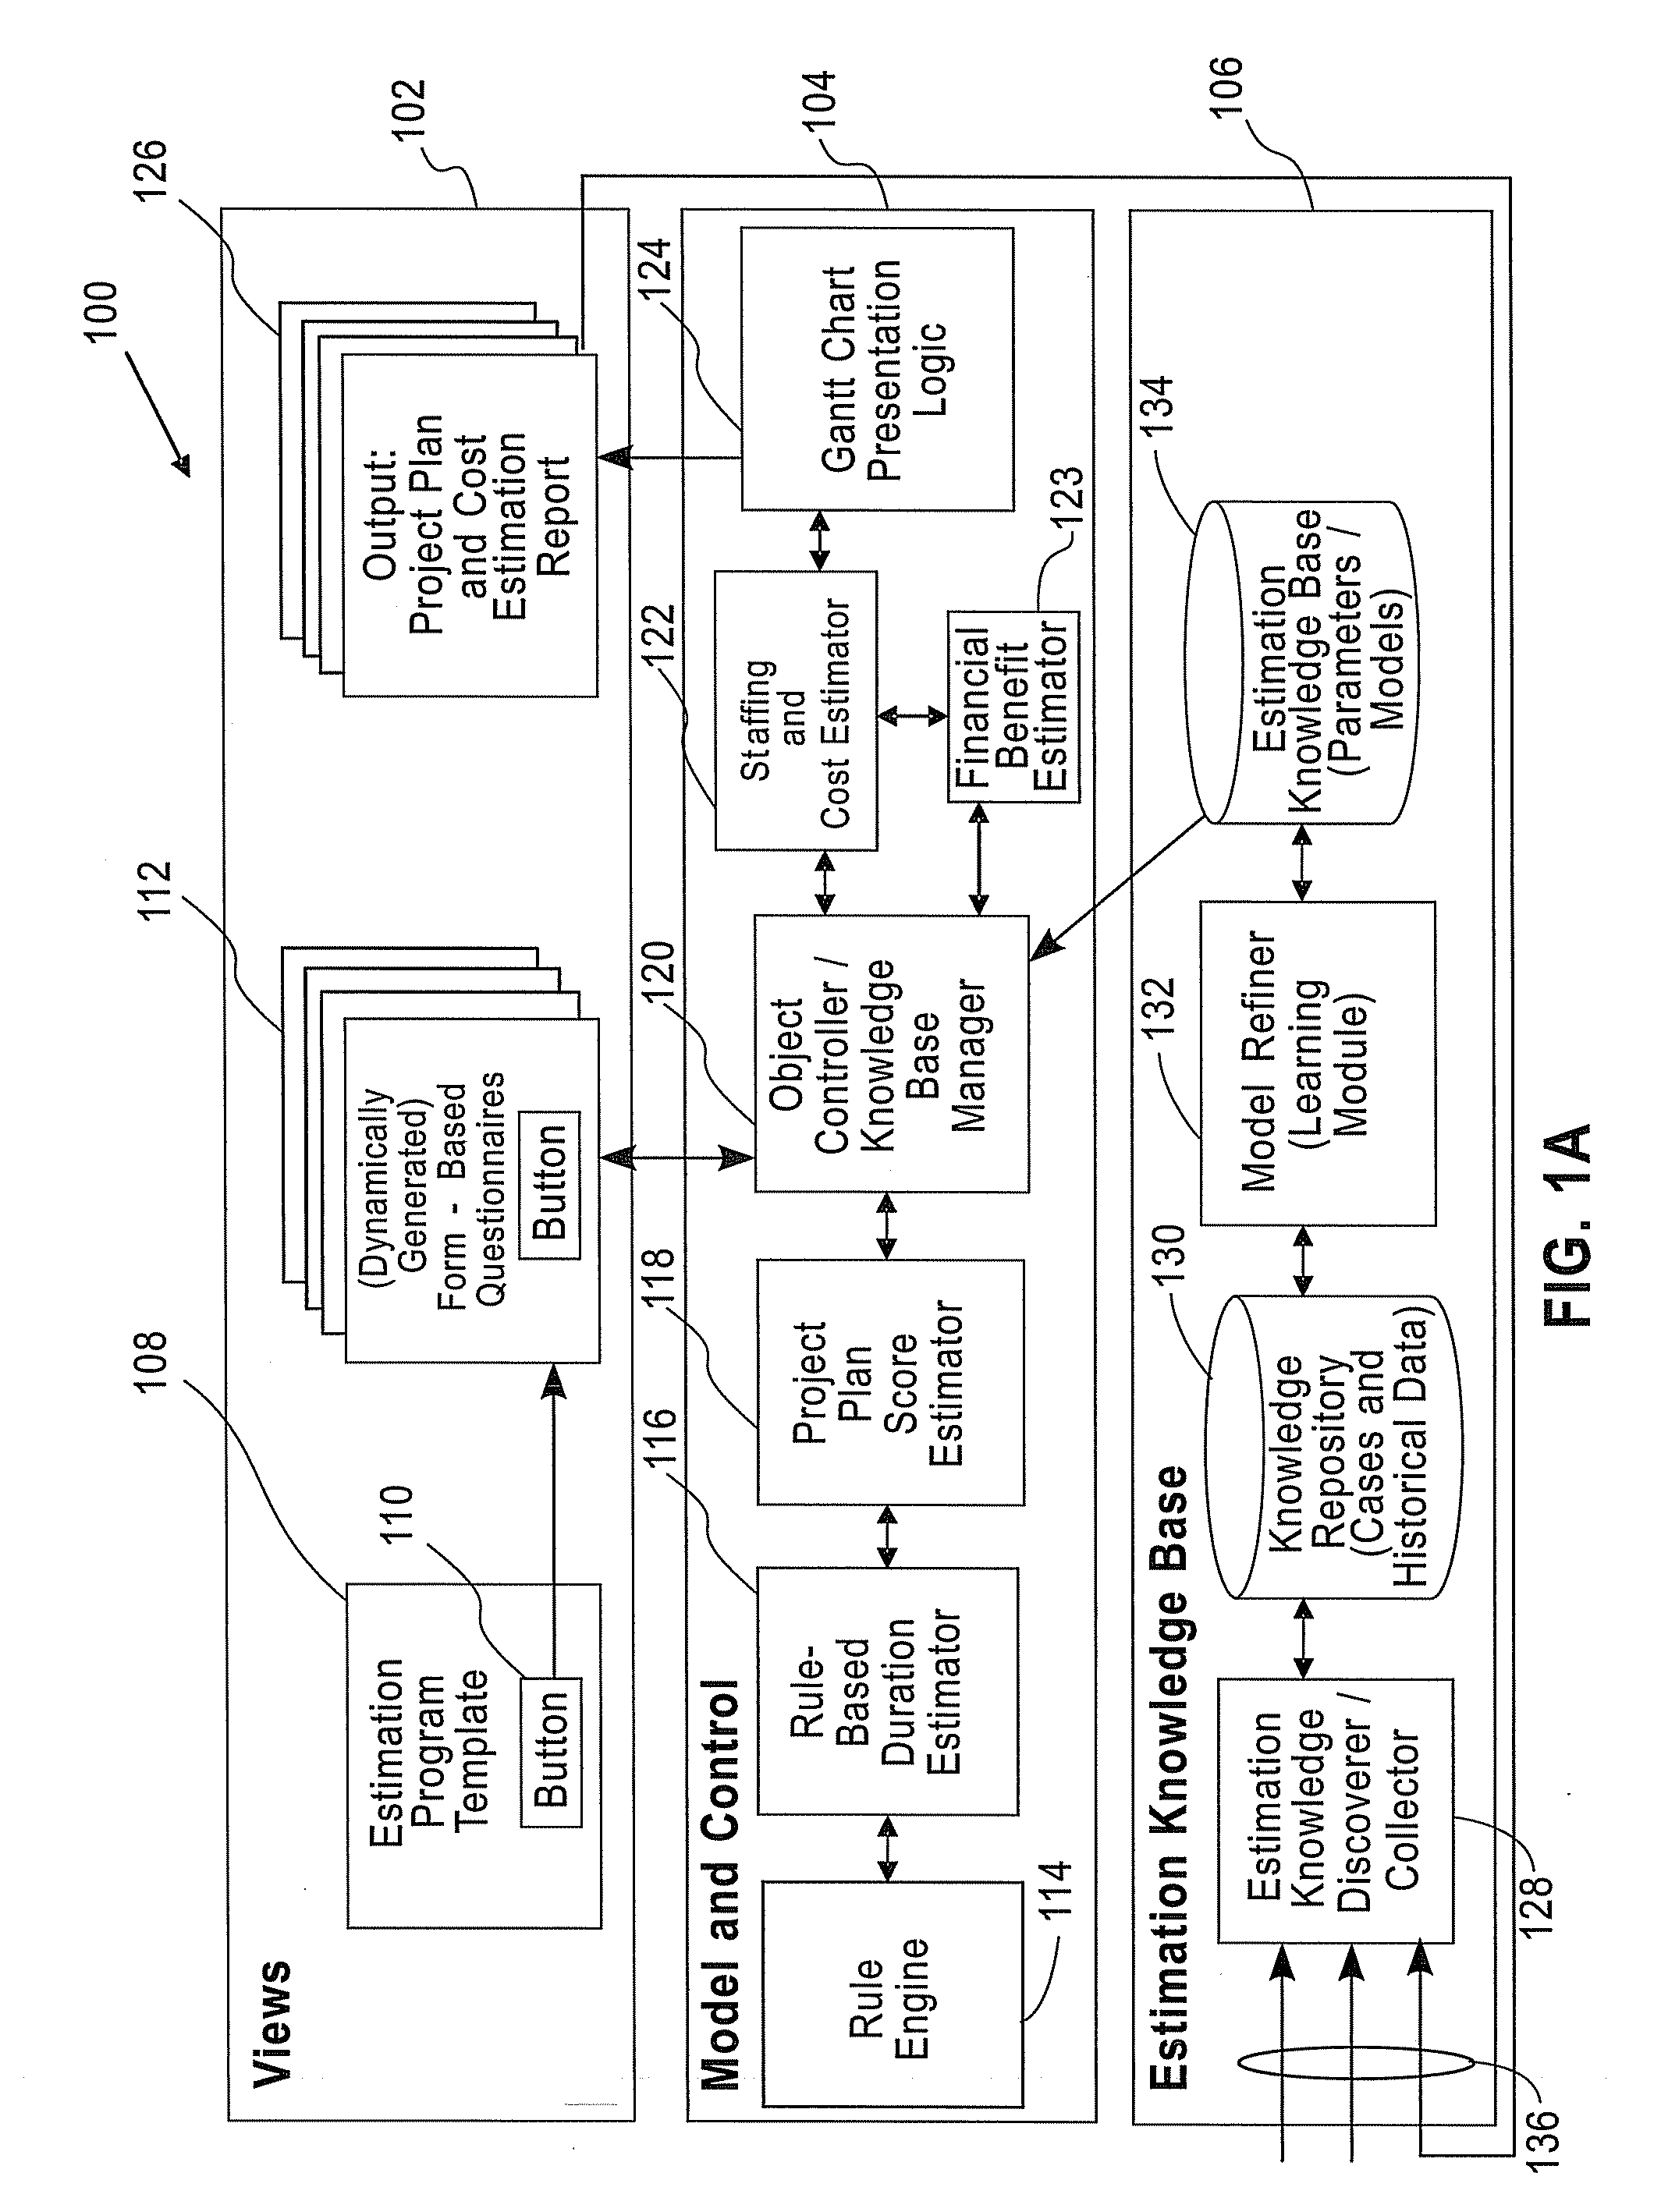 Method and system for evaluating multi-dimensional project plans for implementing packaged software applications